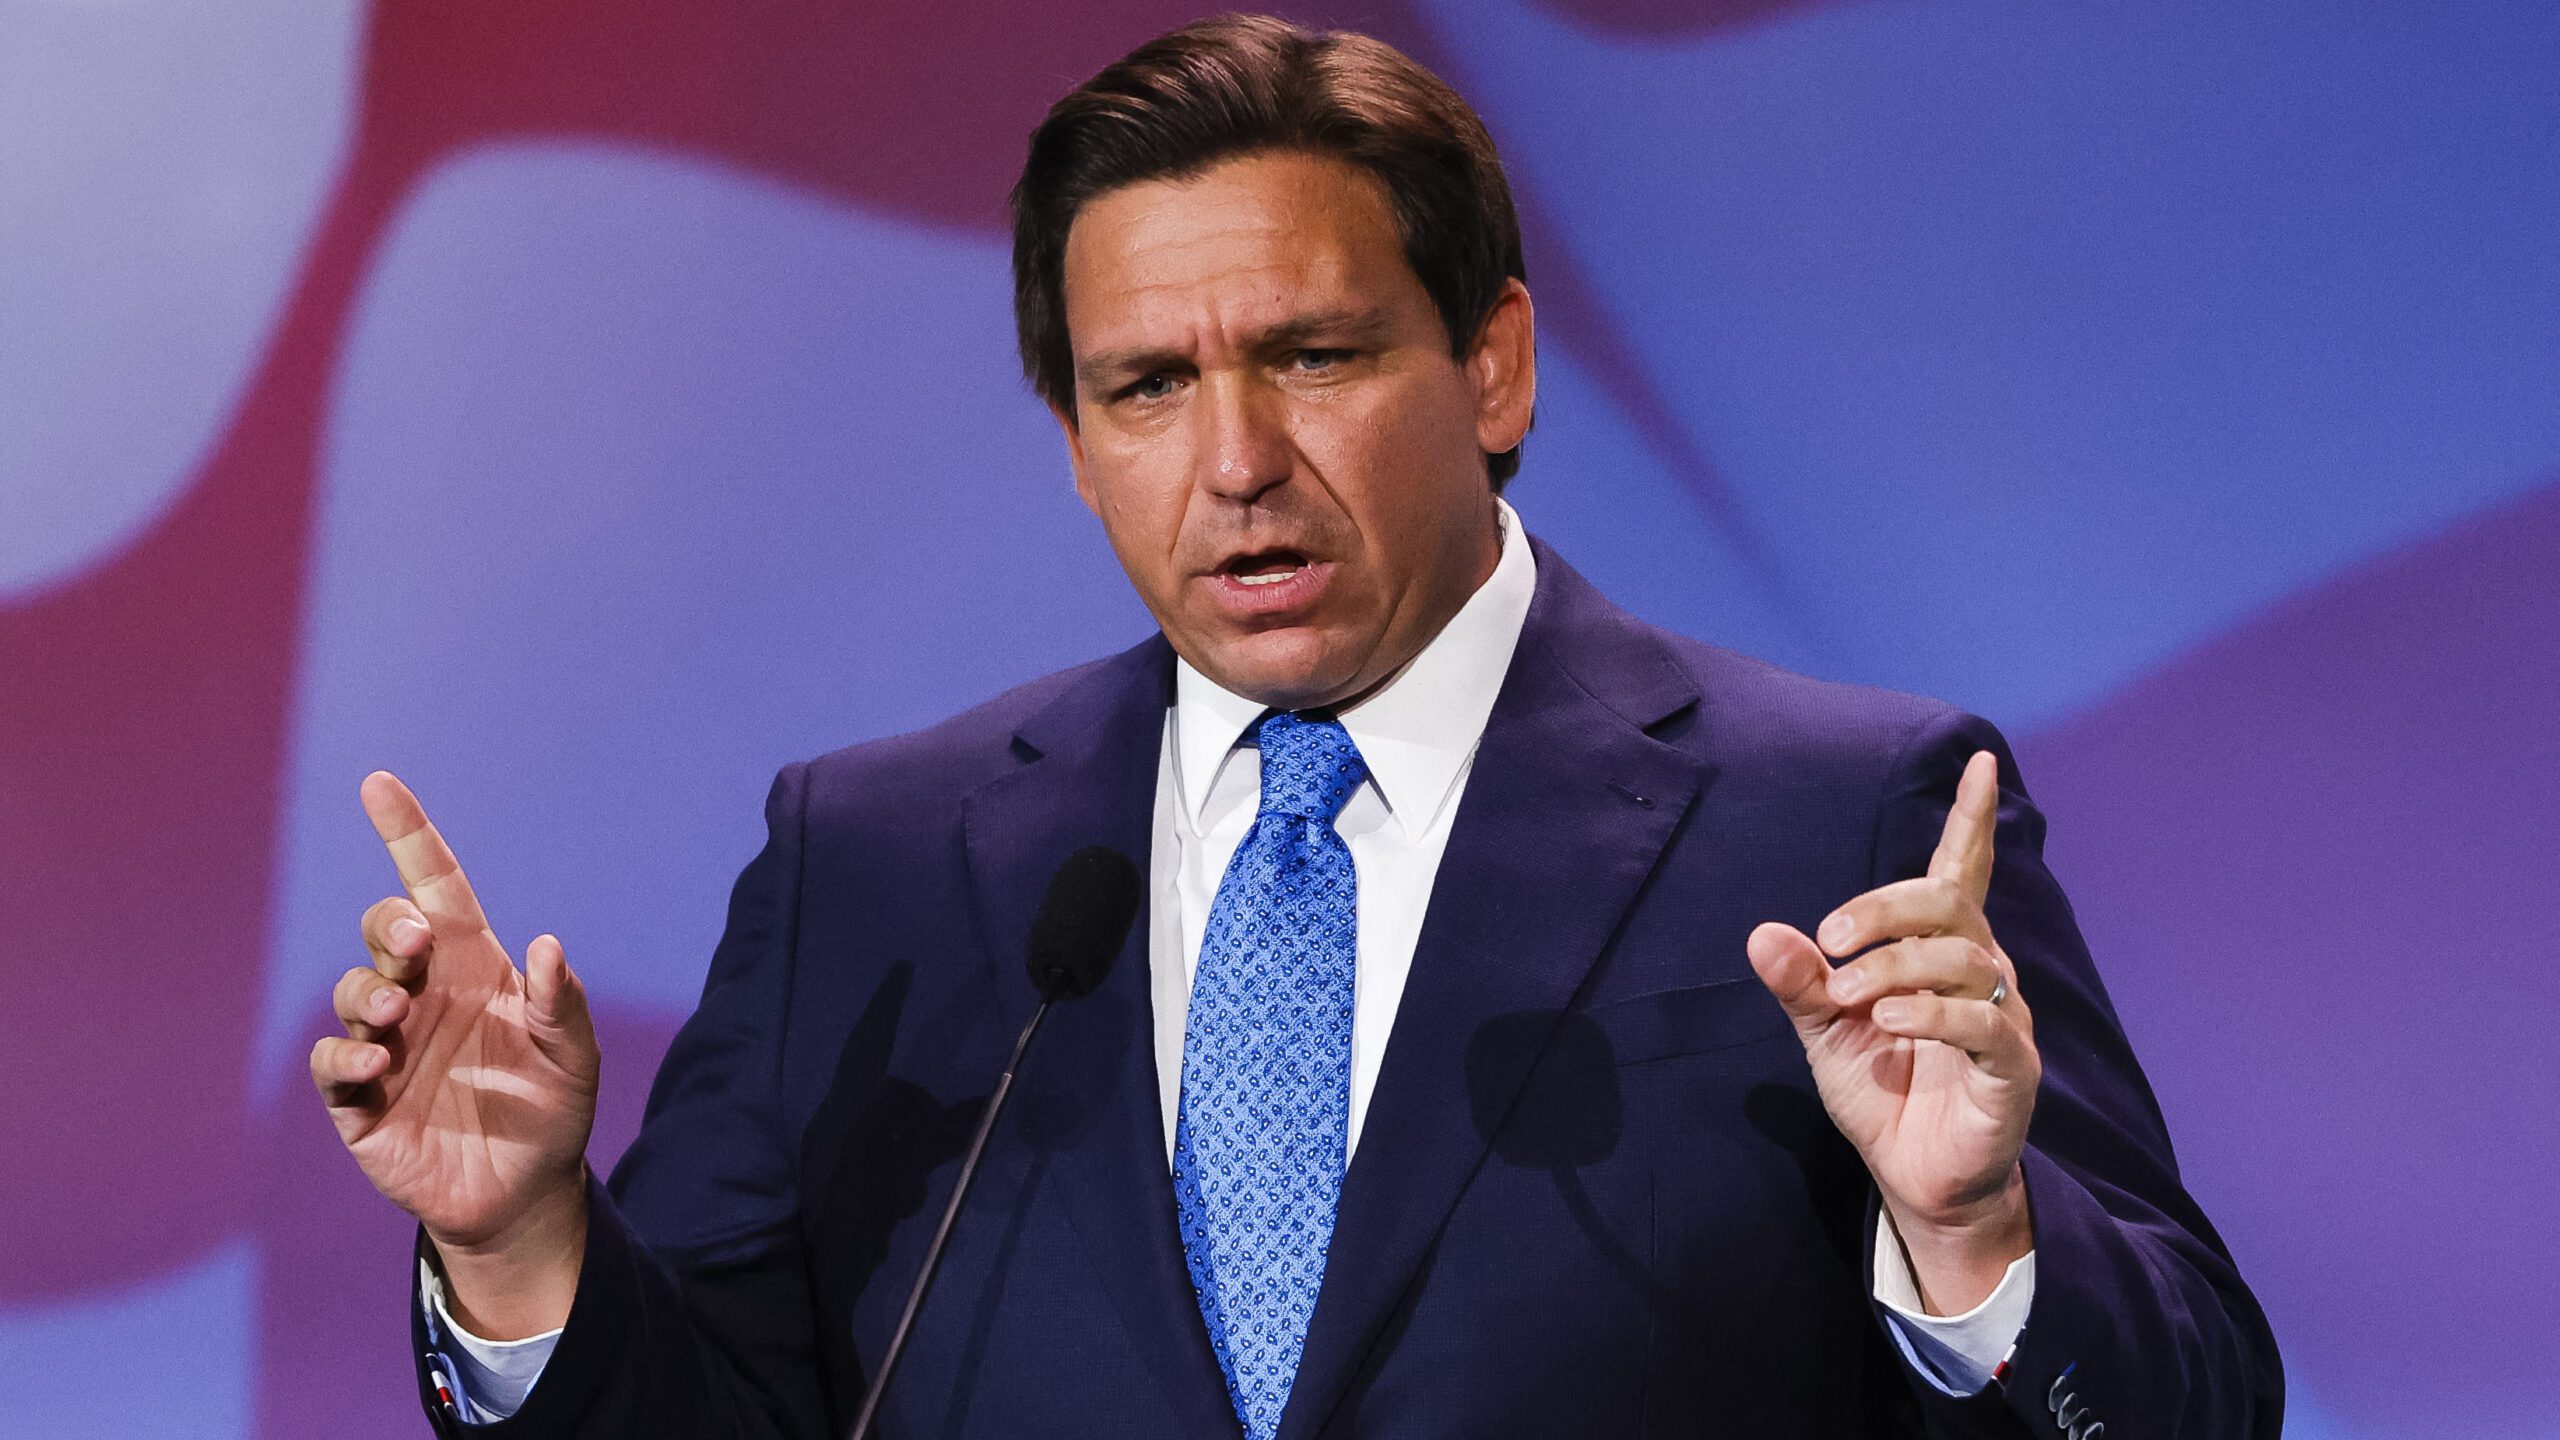 desantis-responds-to-salacious-reports-about-pudding-and-force-feeding-detainees-at-gitmo:-‘bring-it-on’